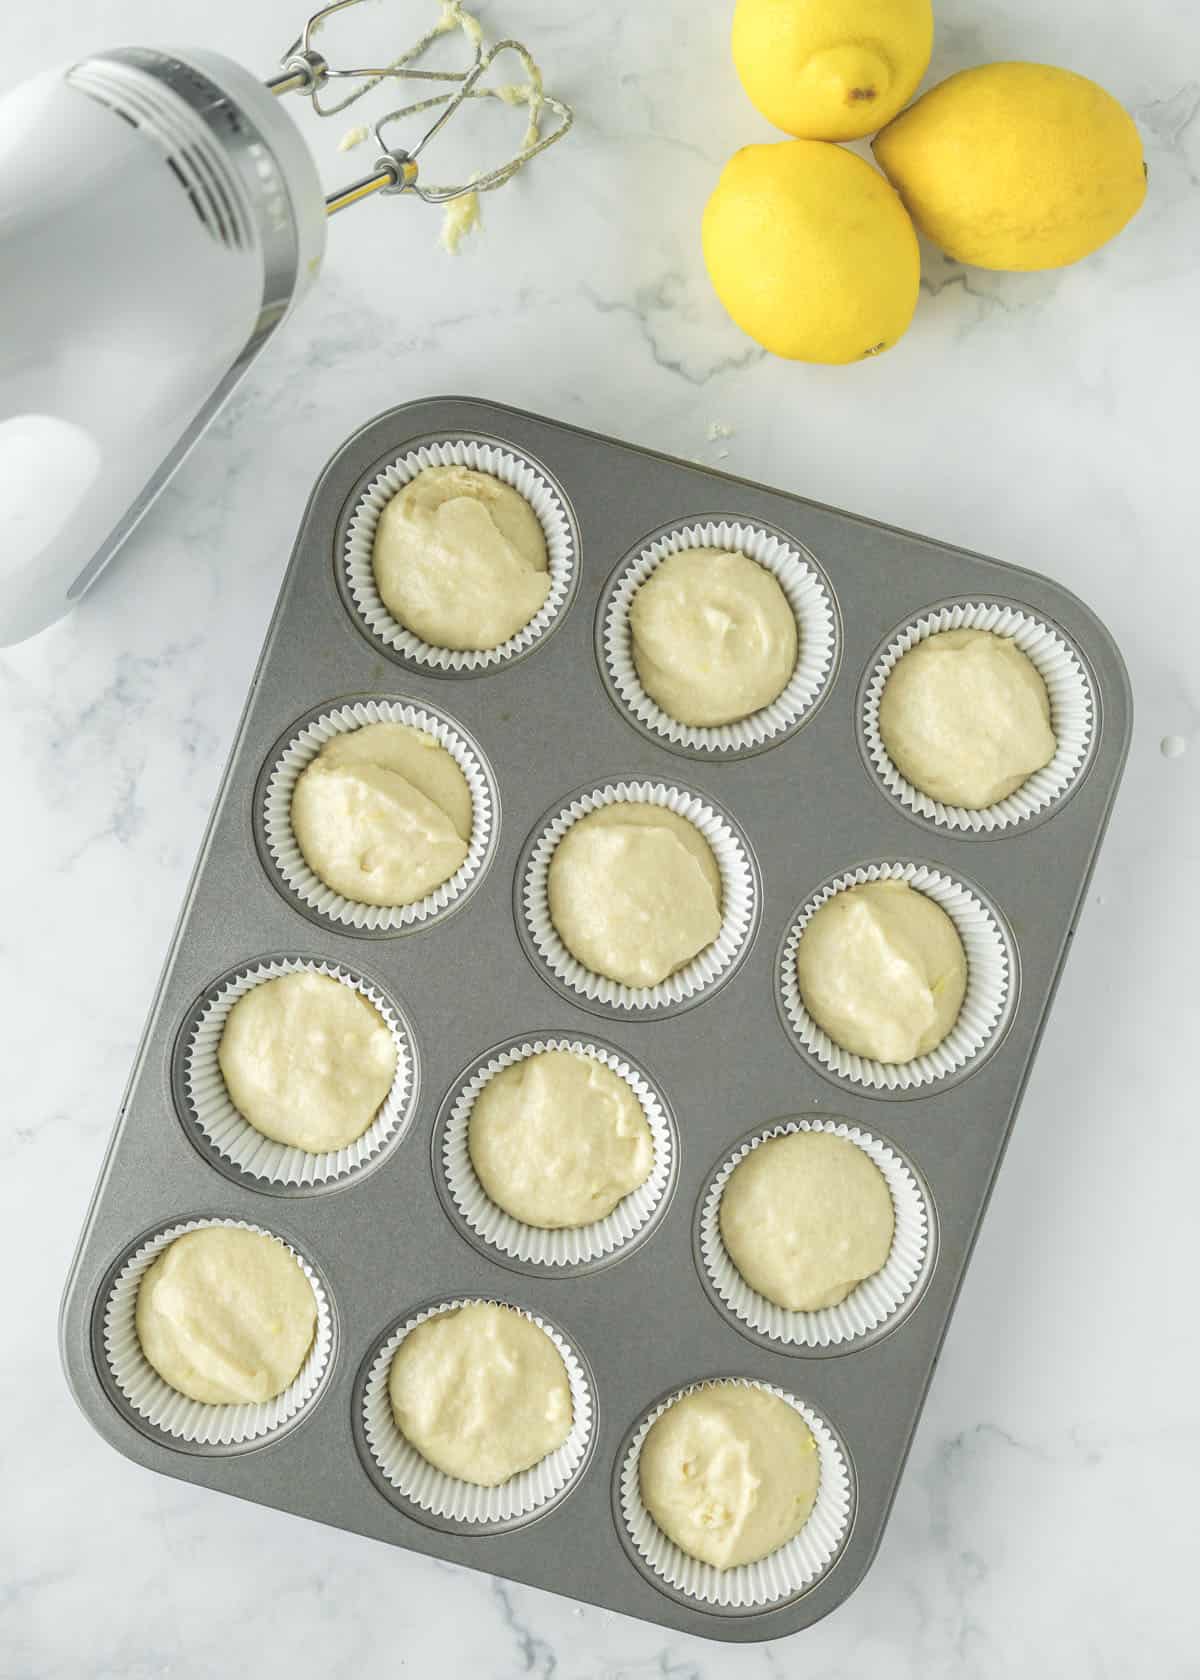 Completed cupcake batter poured into lined muffin tin.